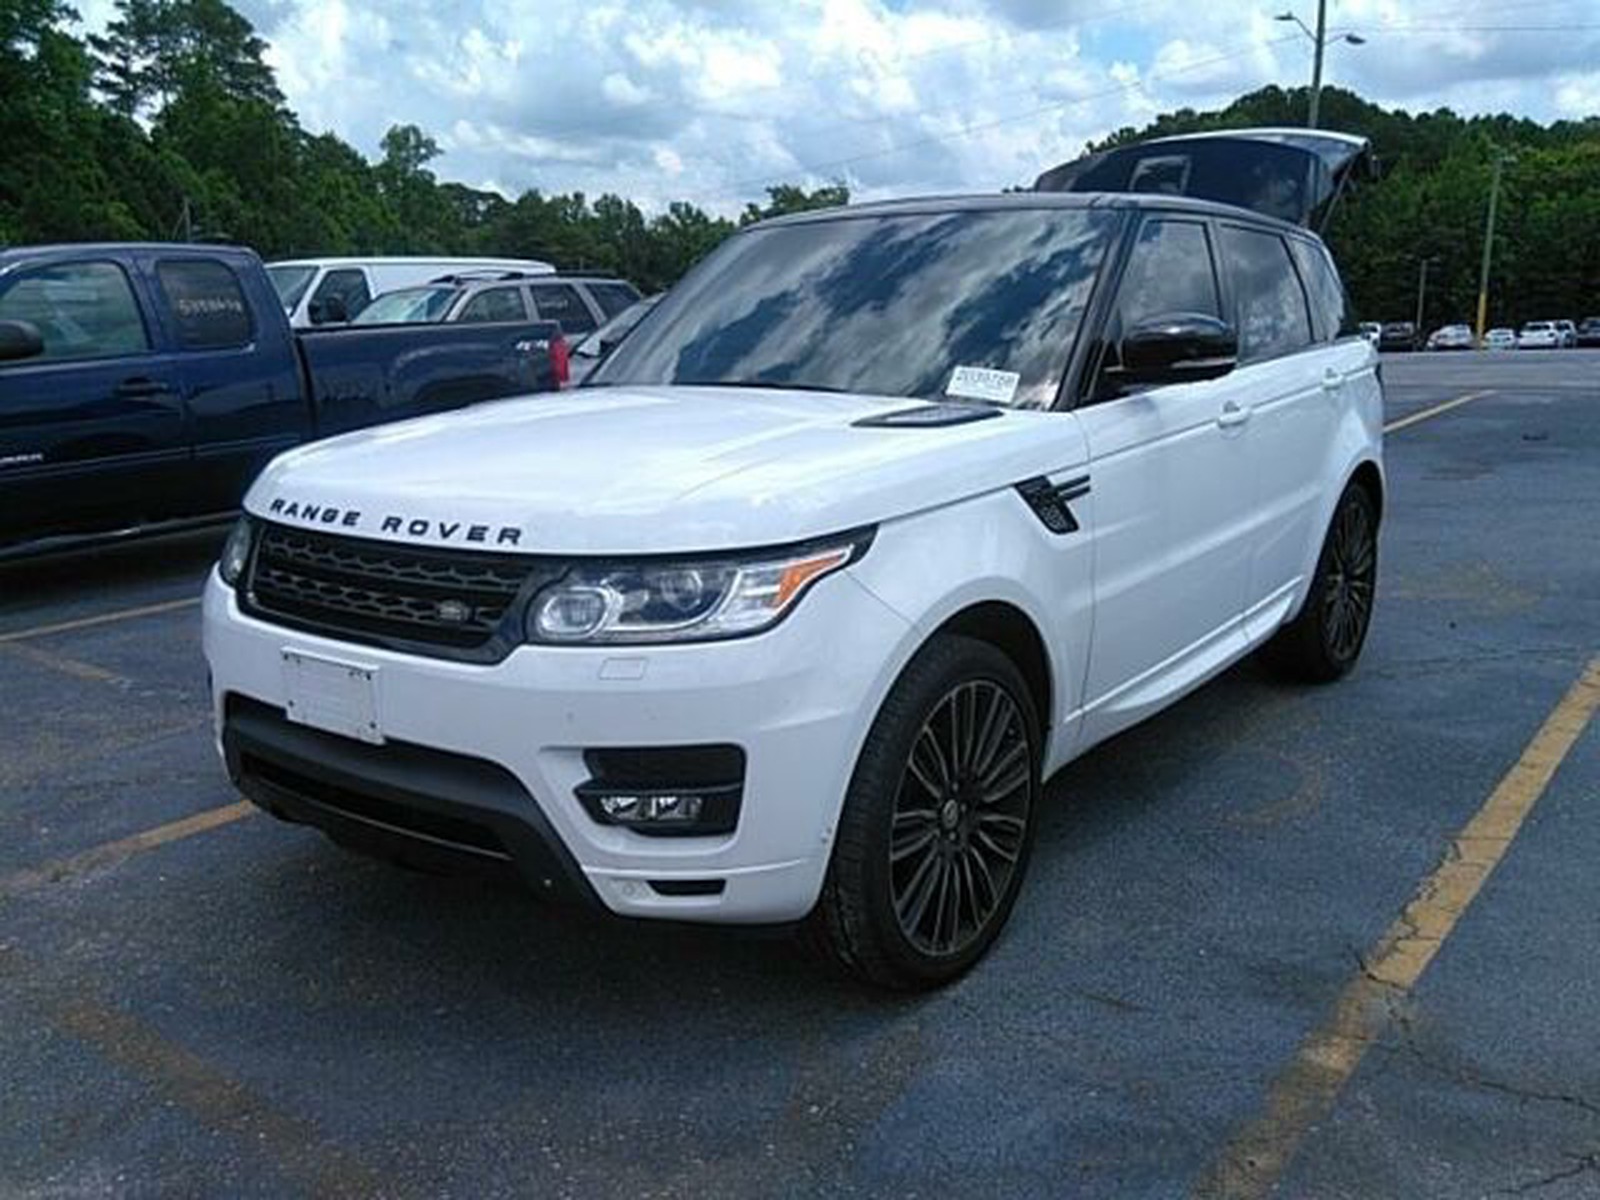 Range Rover Price Miami  : Every Used Car For Sale Comes With A Free Carfax Report.